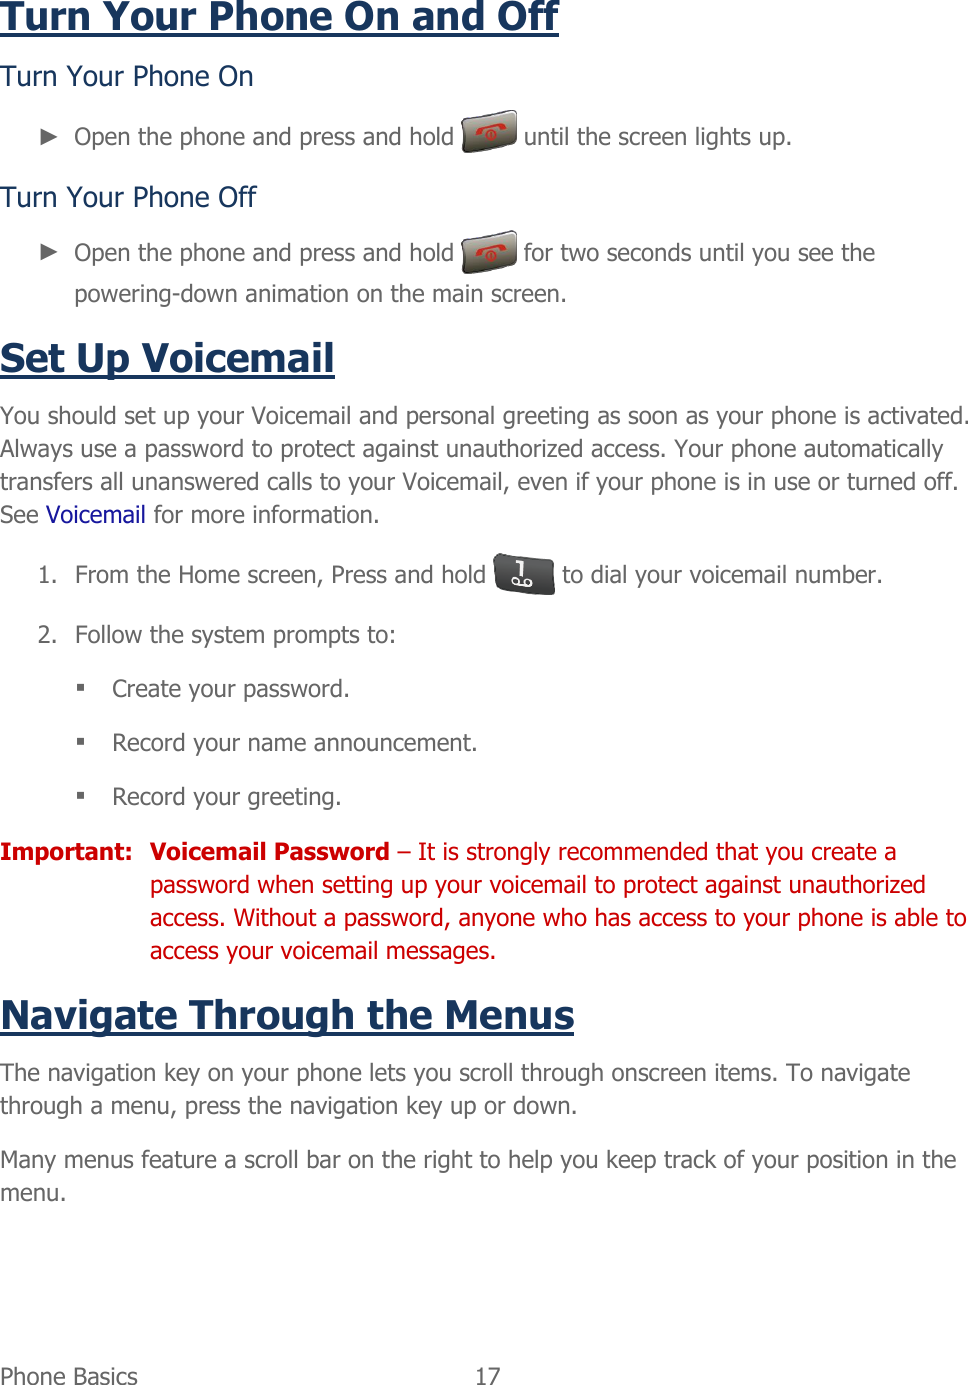  Phone Basics  17   Turn Your Phone On and Off Turn Your Phone On ► Open the phone and press and hold   until the screen lights up. Turn Your Phone Off ► Open the phone and press and hold   for two seconds until you see the powering-down animation on the main screen. Set Up Voicemail You should set up your Voicemail and personal greeting as soon as your phone is activated. Always use a password to protect against unauthorized access. Your phone automatically transfers all unanswered calls to your Voicemail, even if your phone is in use or turned off. See Voicemail for more information. 1. From the Home screen, Press and hold   to dial your voicemail number. 2. Follow the system prompts to:  Create your password.  Record your name announcement.  Record your greeting. Important:  Voicemail Password – It is strongly recommended that you create a password when setting up your voicemail to protect against unauthorized access. Without a password, anyone who has access to your phone is able to access your voicemail messages. Navigate Through the Menus The navigation key on your phone lets you scroll through onscreen items. To navigate through a menu, press the navigation key up or down. Many menus feature a scroll bar on the right to help you keep track of your position in the menu. 